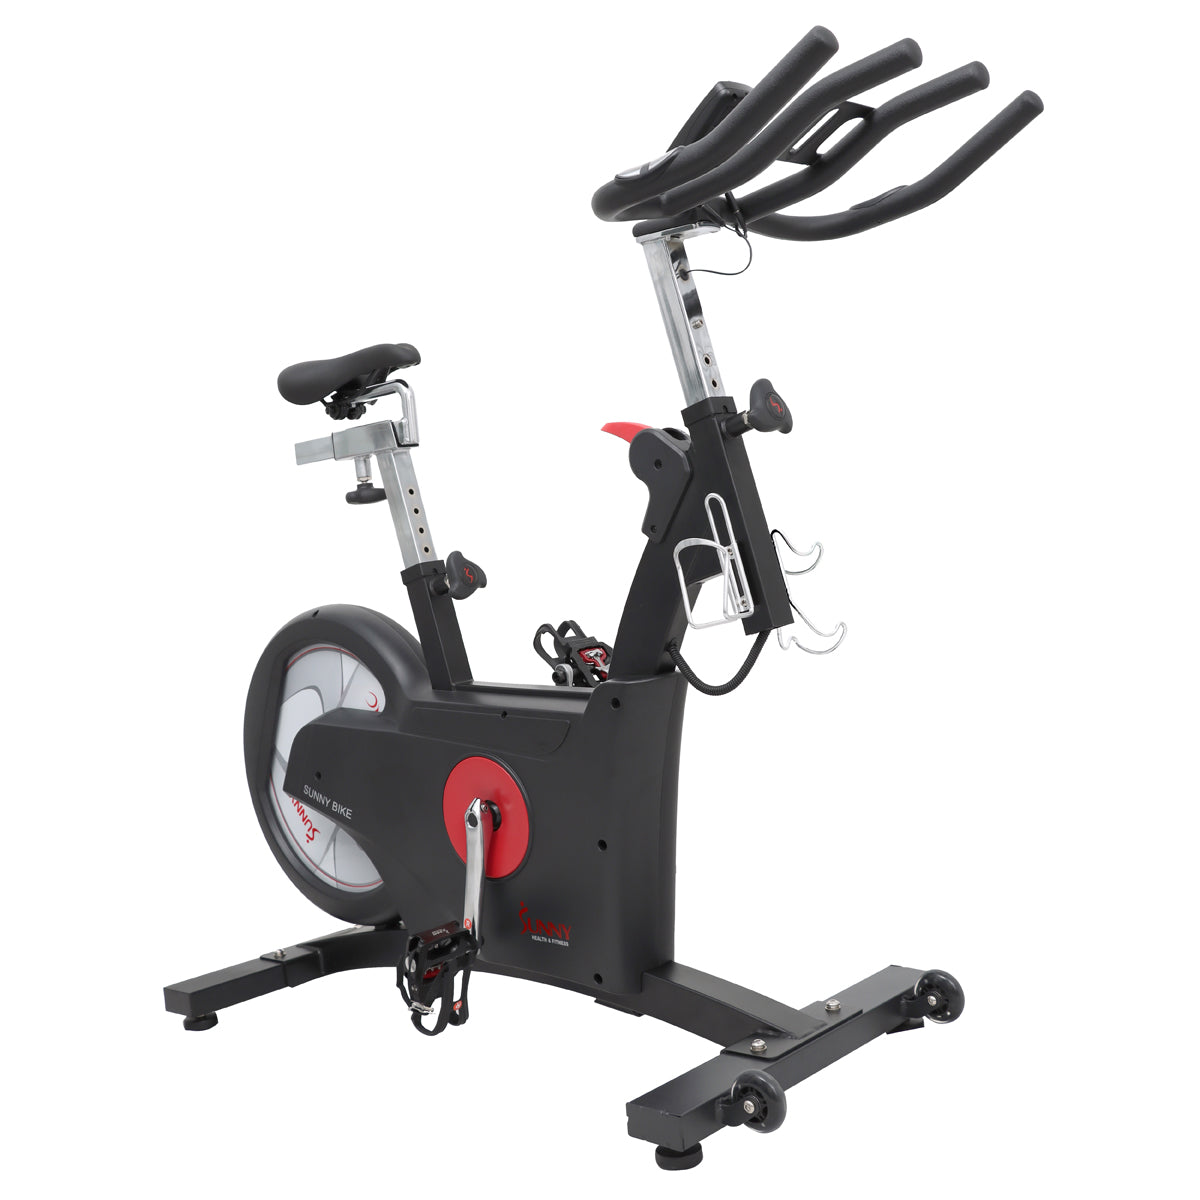 Ascend S1 Spin Bike - 23 lb Flywheel Indoor Cycling Exercise Bike